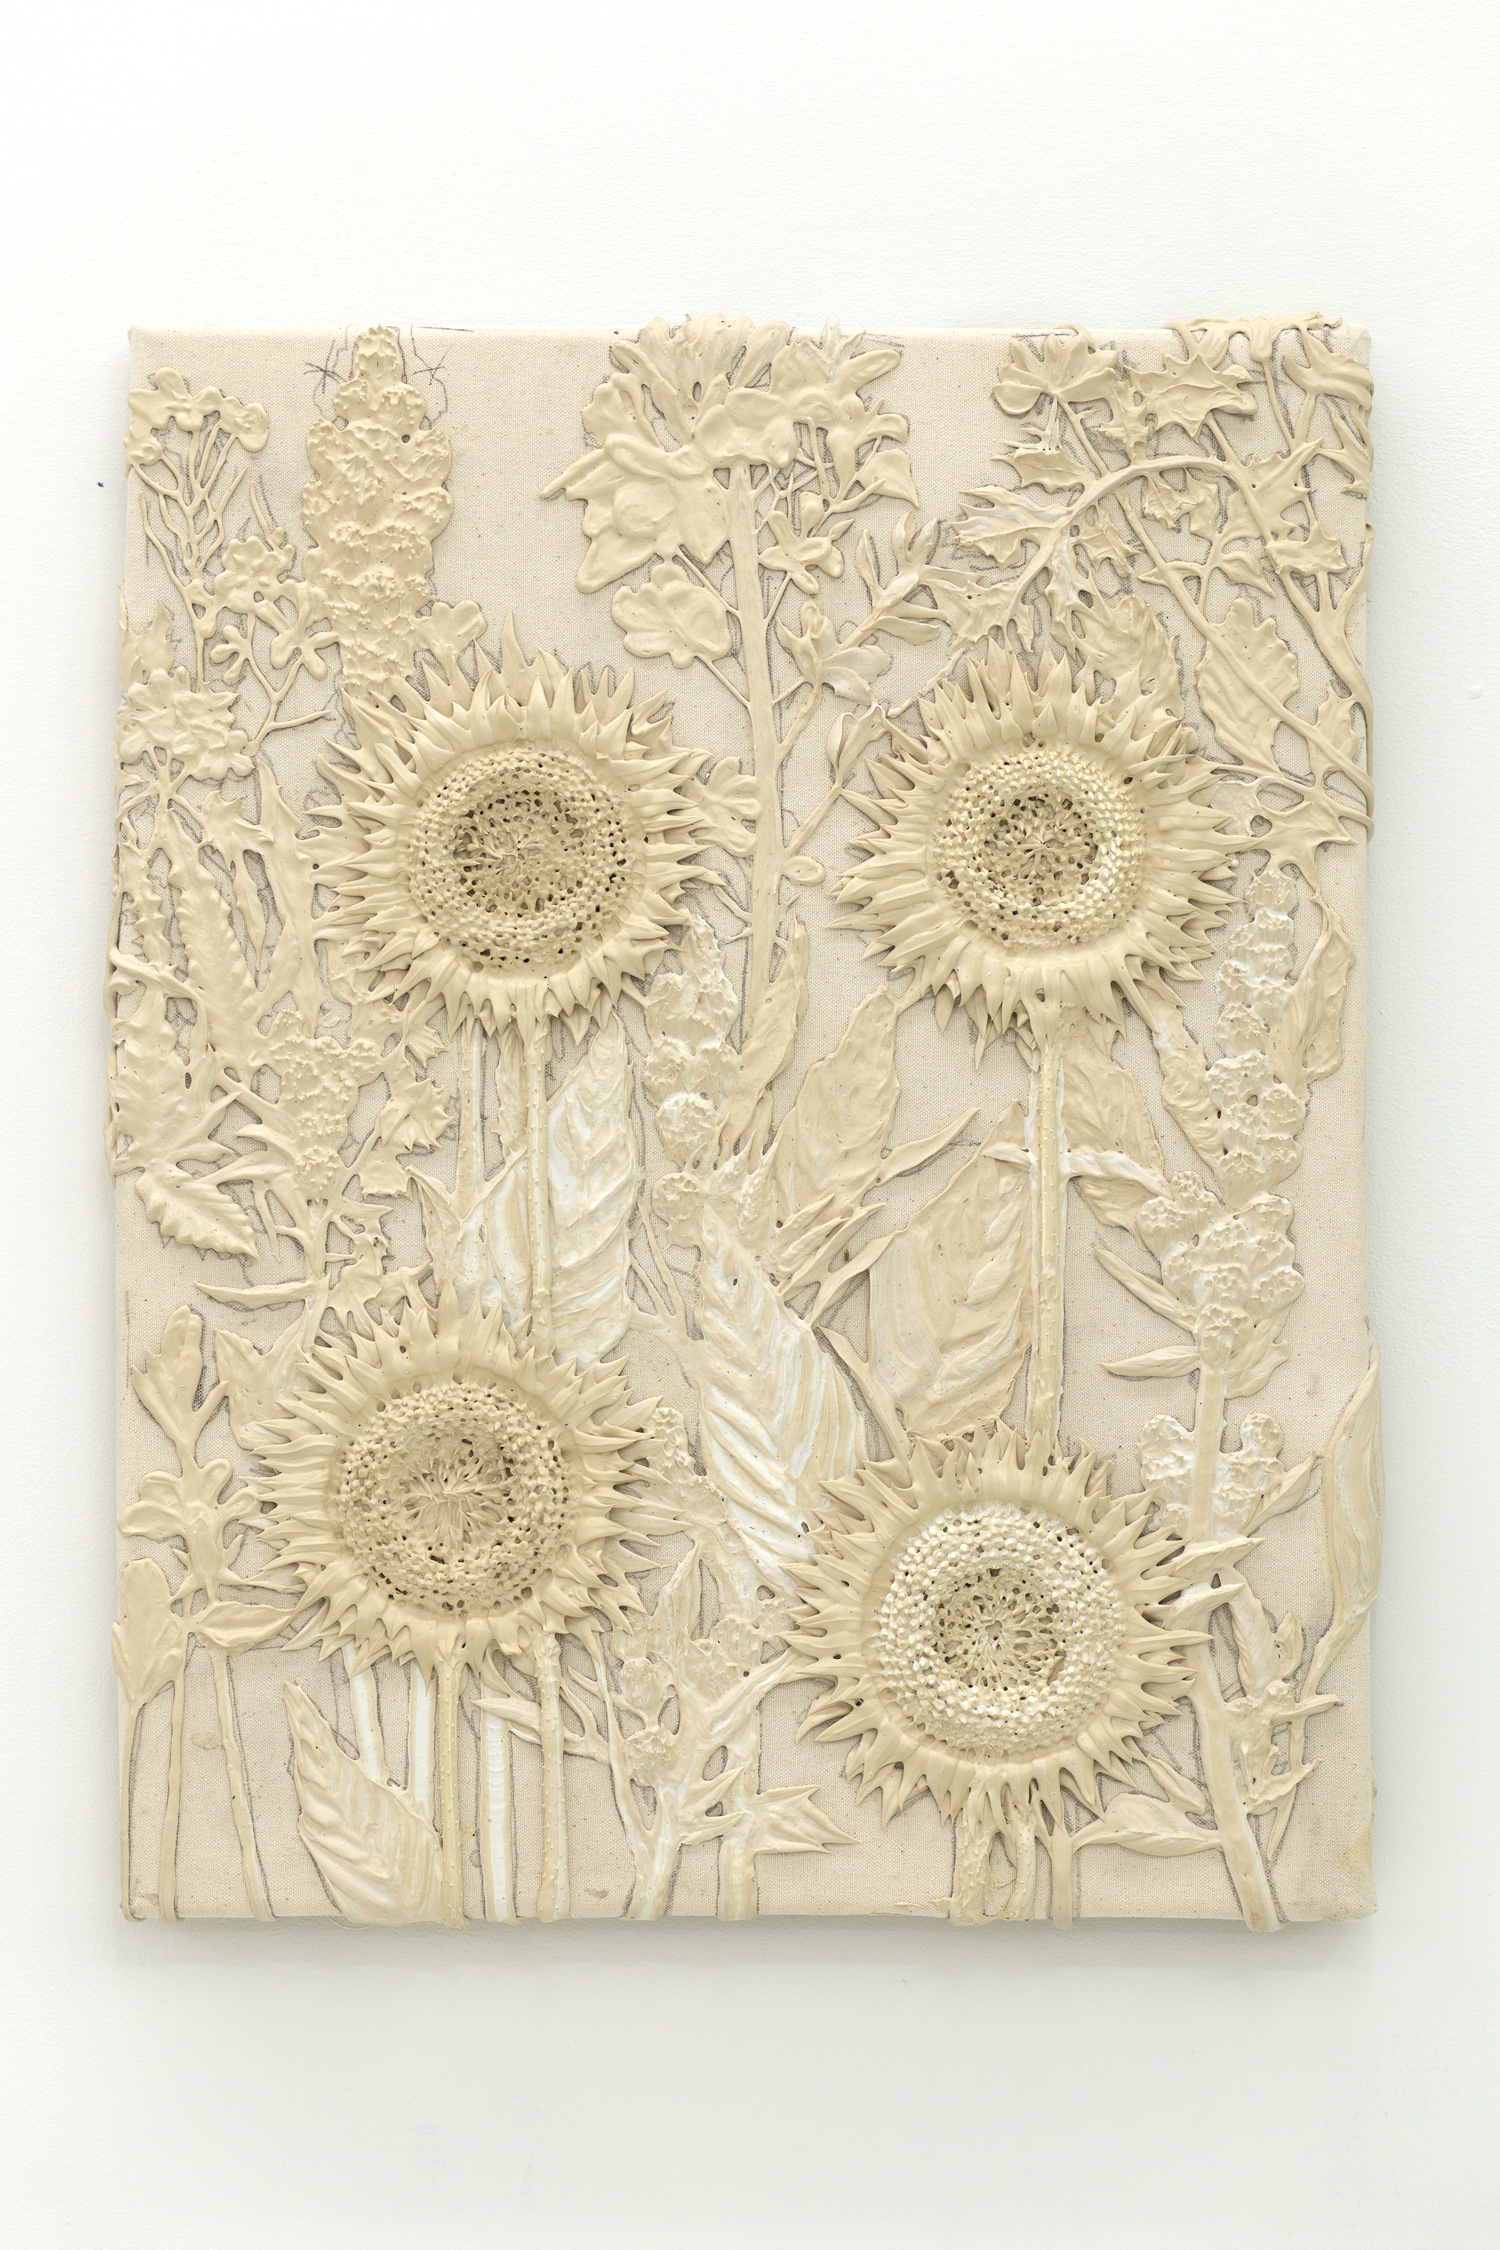 Tan monotone plastic painting of three sunflowers and assorted other plants